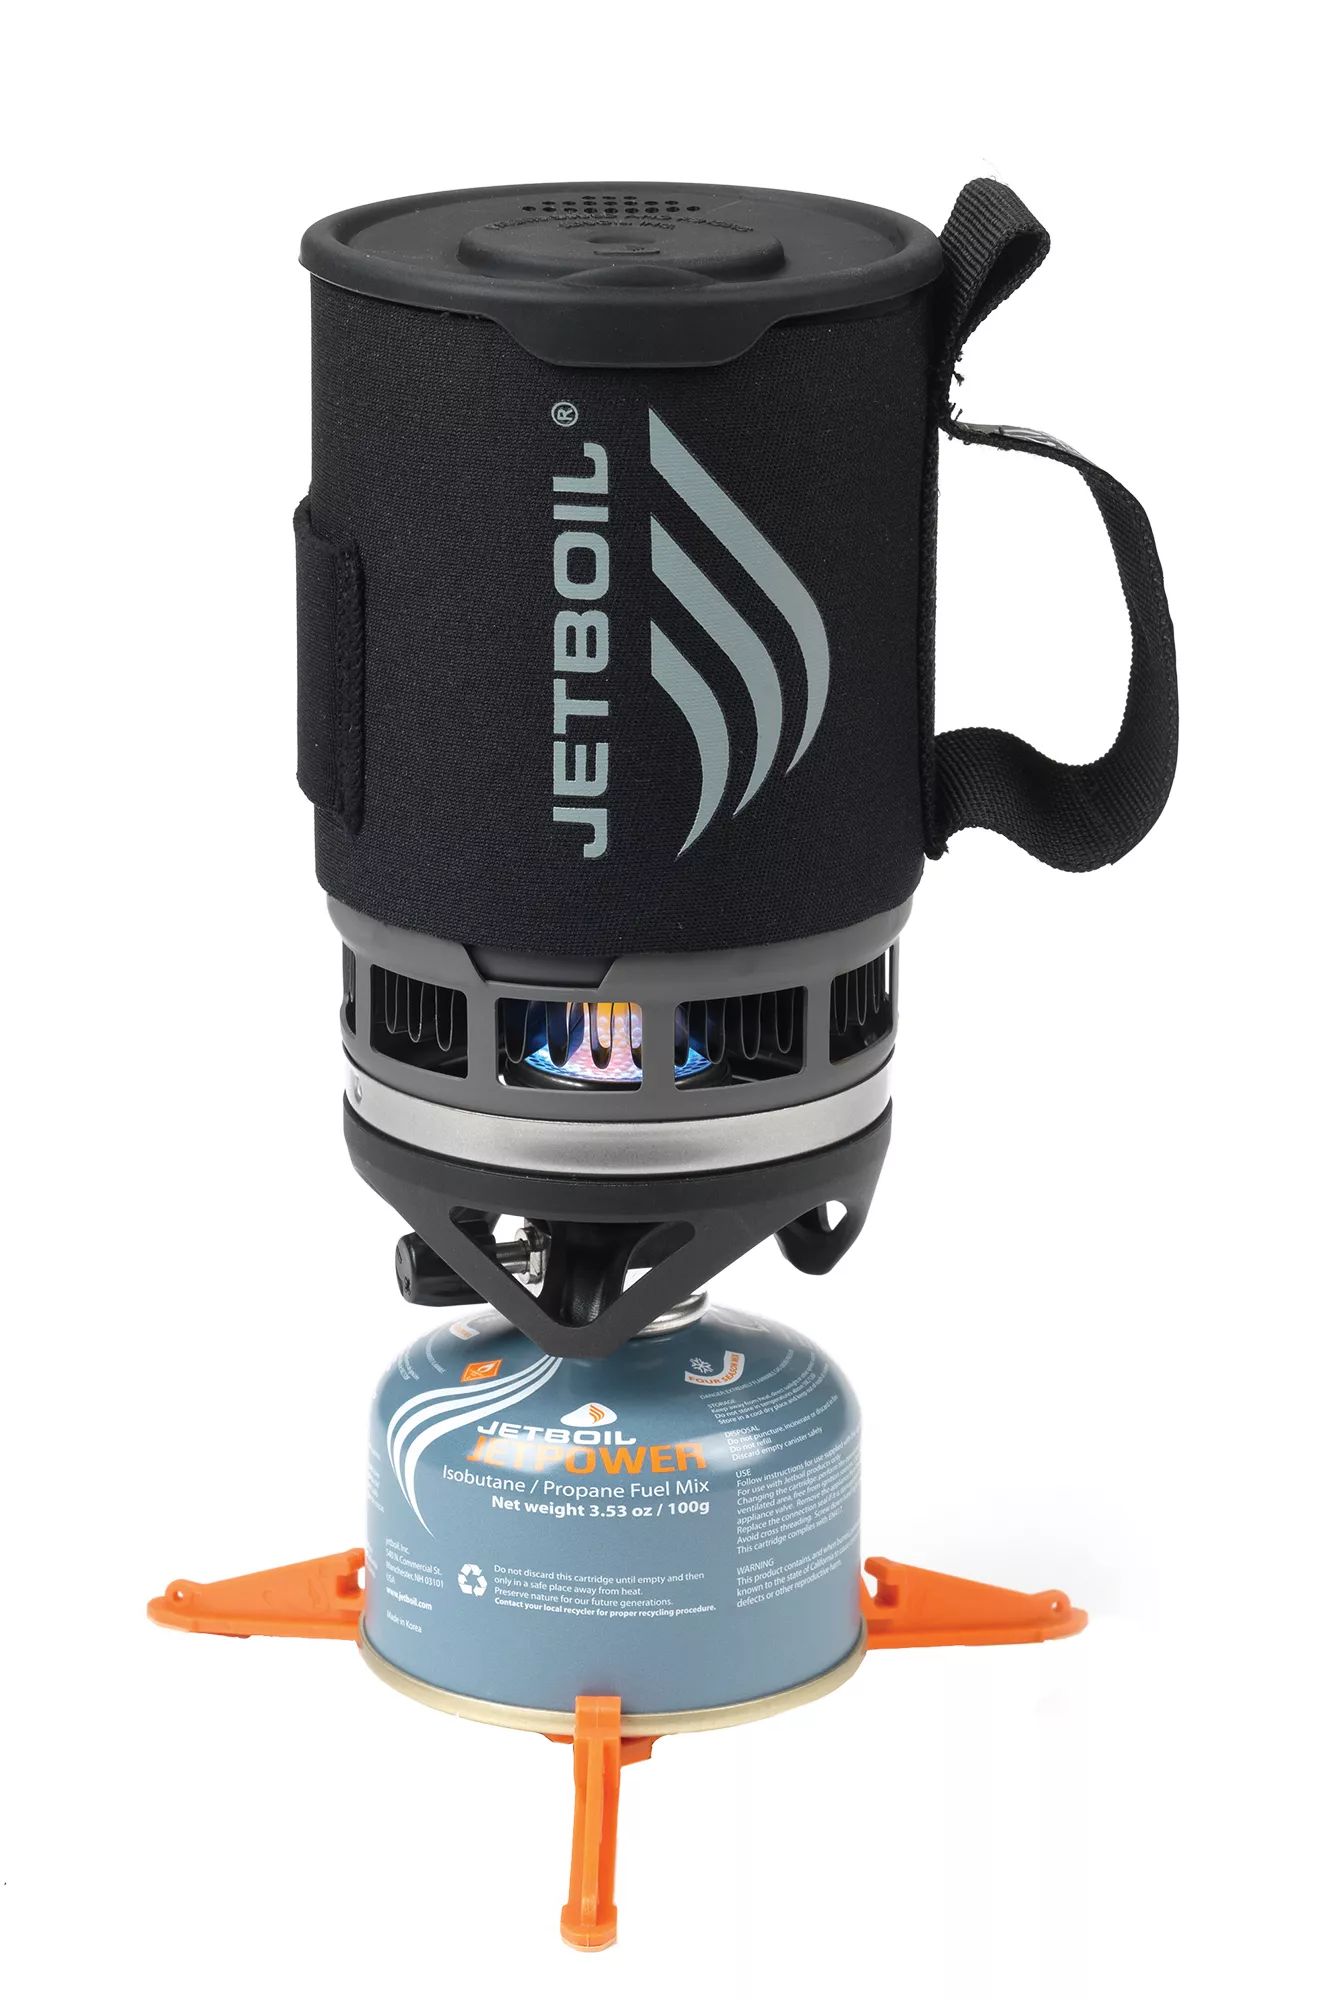 Jetboil Zip Cooking System, Size: One size | Dick's Sporting Goods